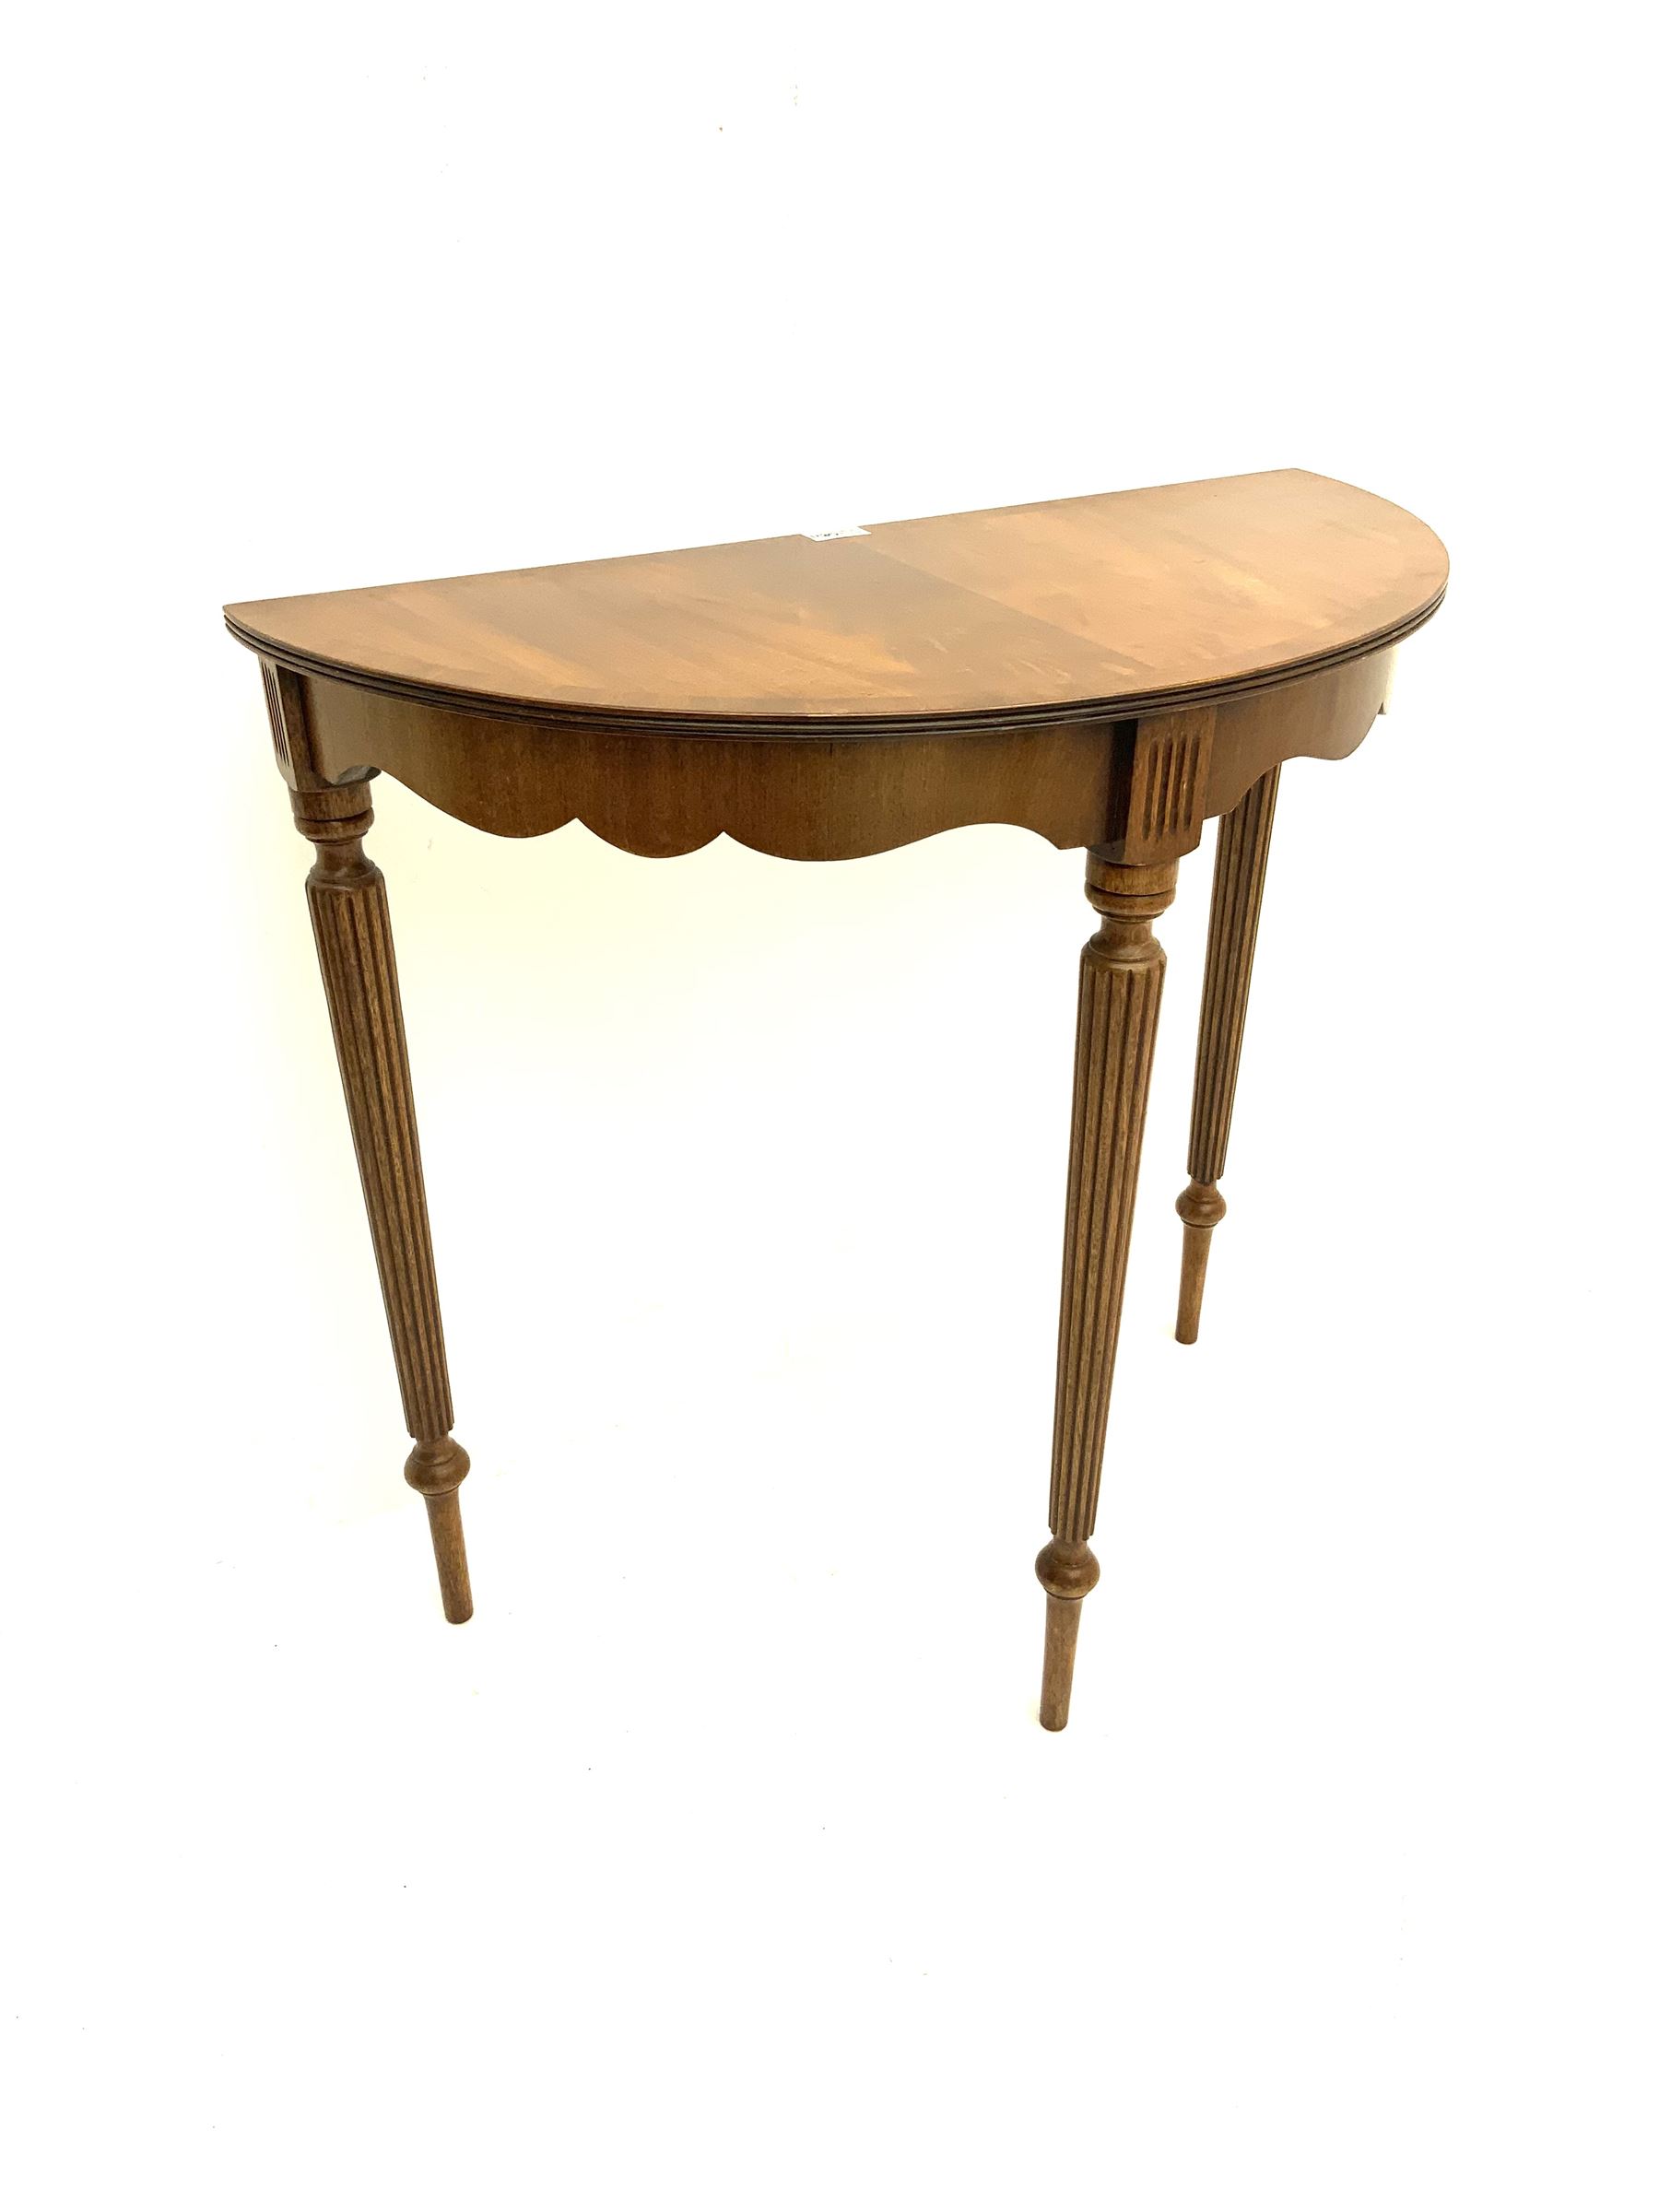 20th century mahogany demi-lune side table with marquetry top and a similar table - Image 3 of 3